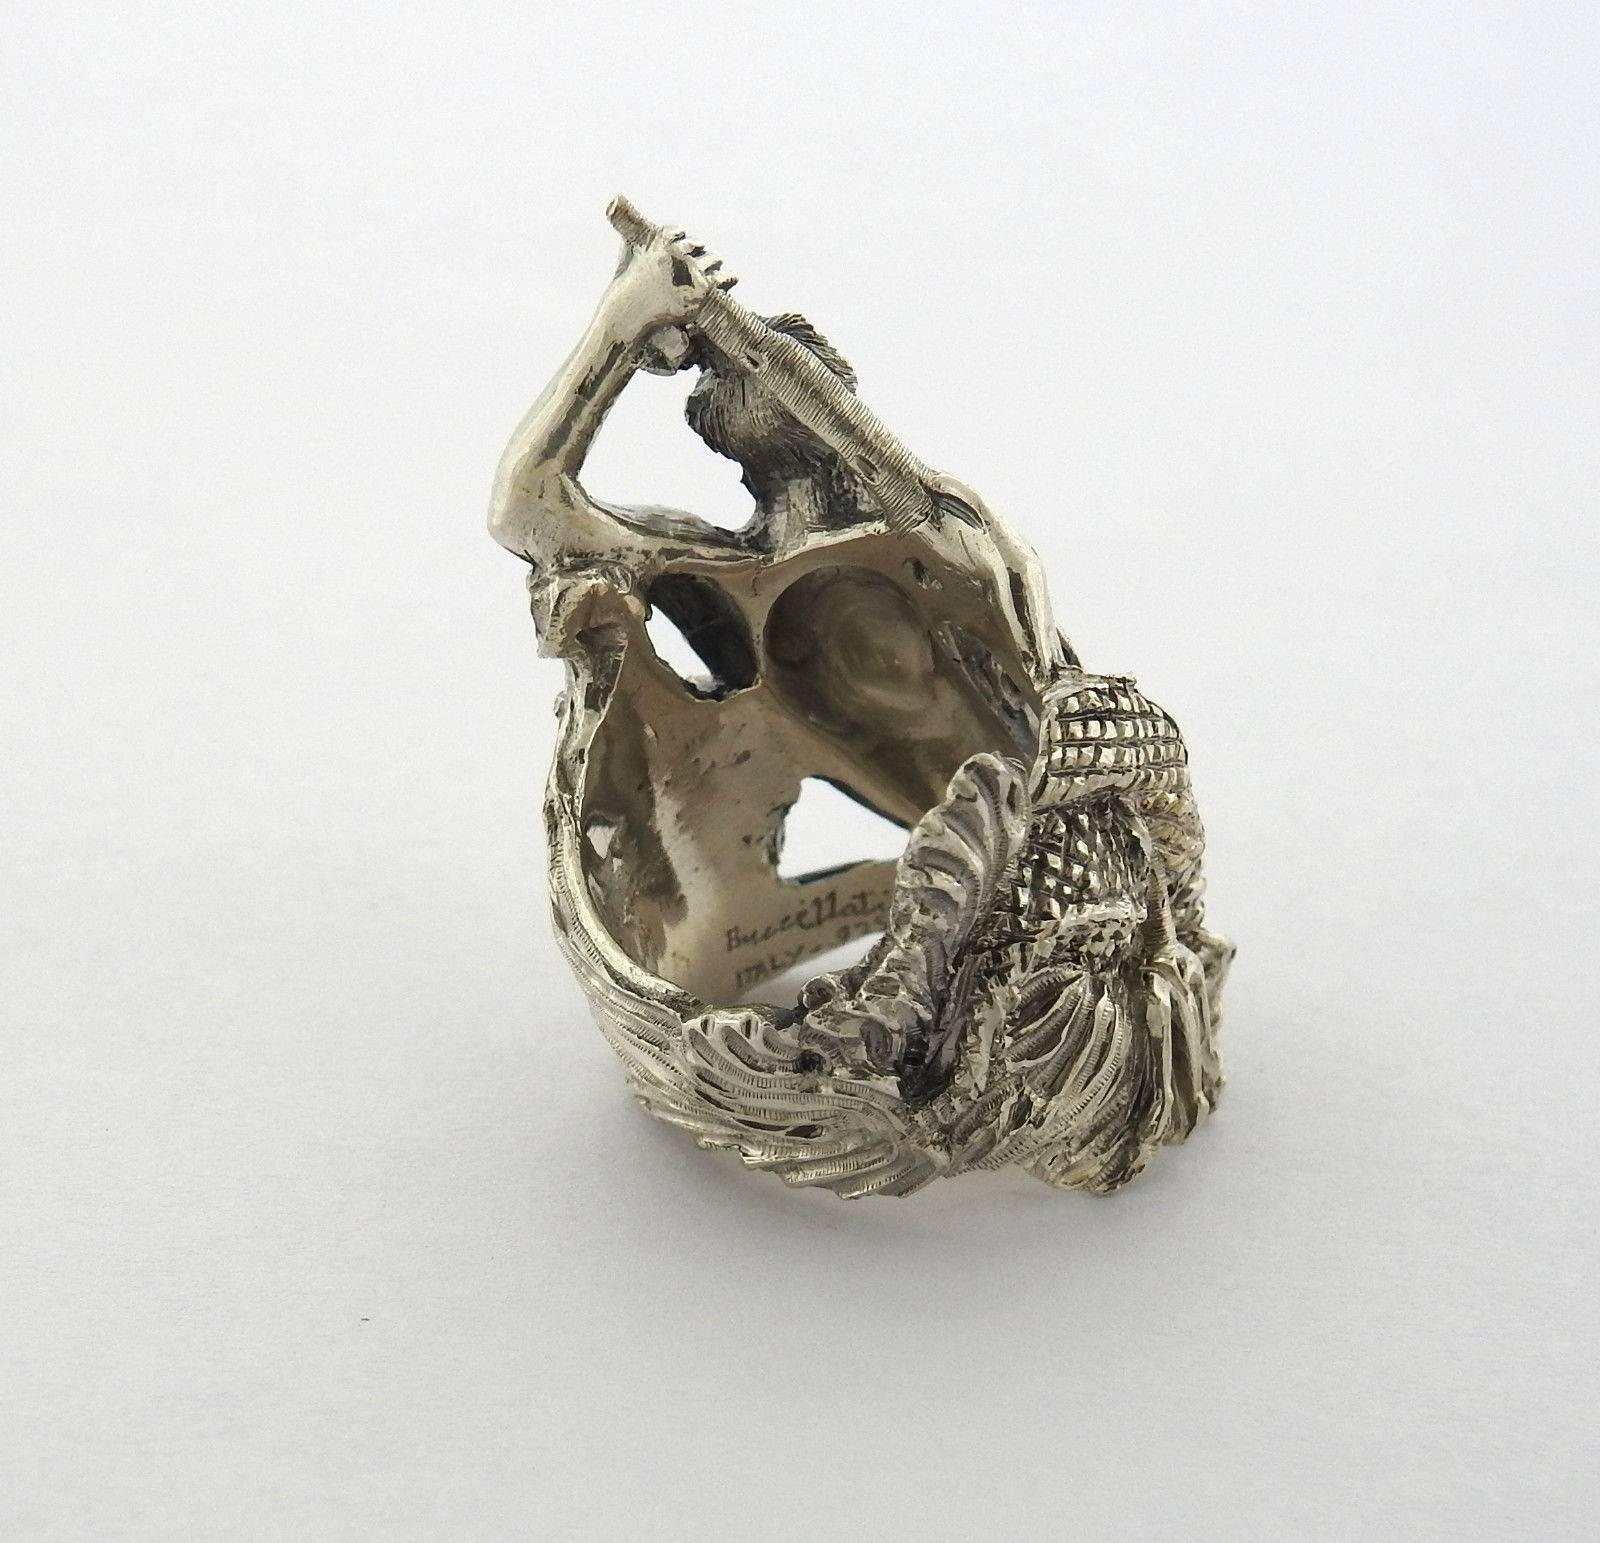 A sterling silver ring depicting Poseidon.  The ring is a size 6, ring top is 36mm wide at the widest point.  The weight of the piece is 19.9 grams.  Marked: Buccellati, Italy, 925.  Comes with Buccellati paperwork.